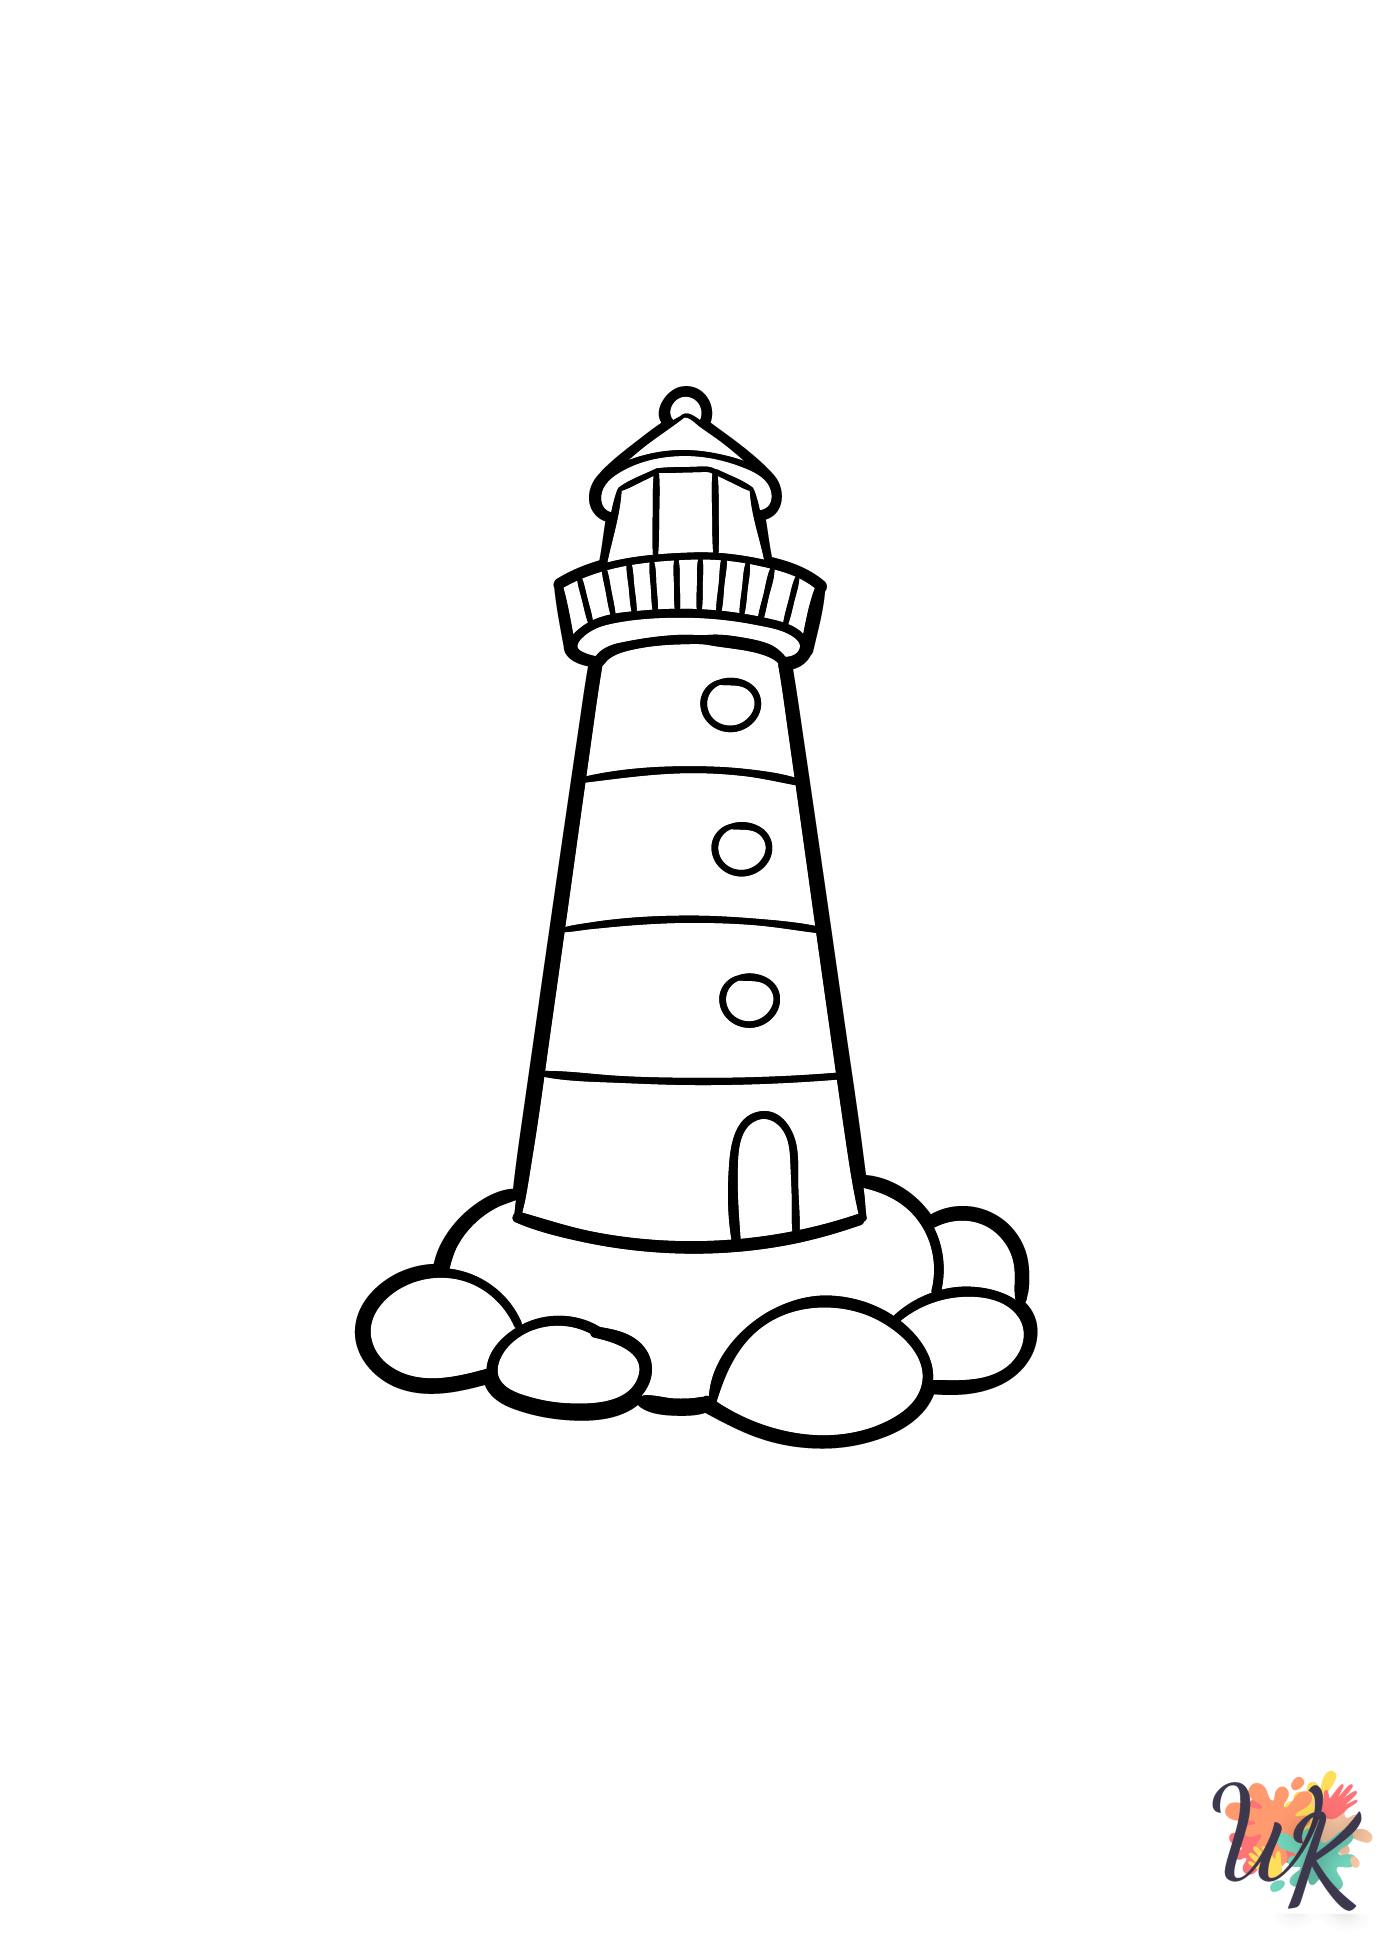 Lighthouse coloring pages for kids